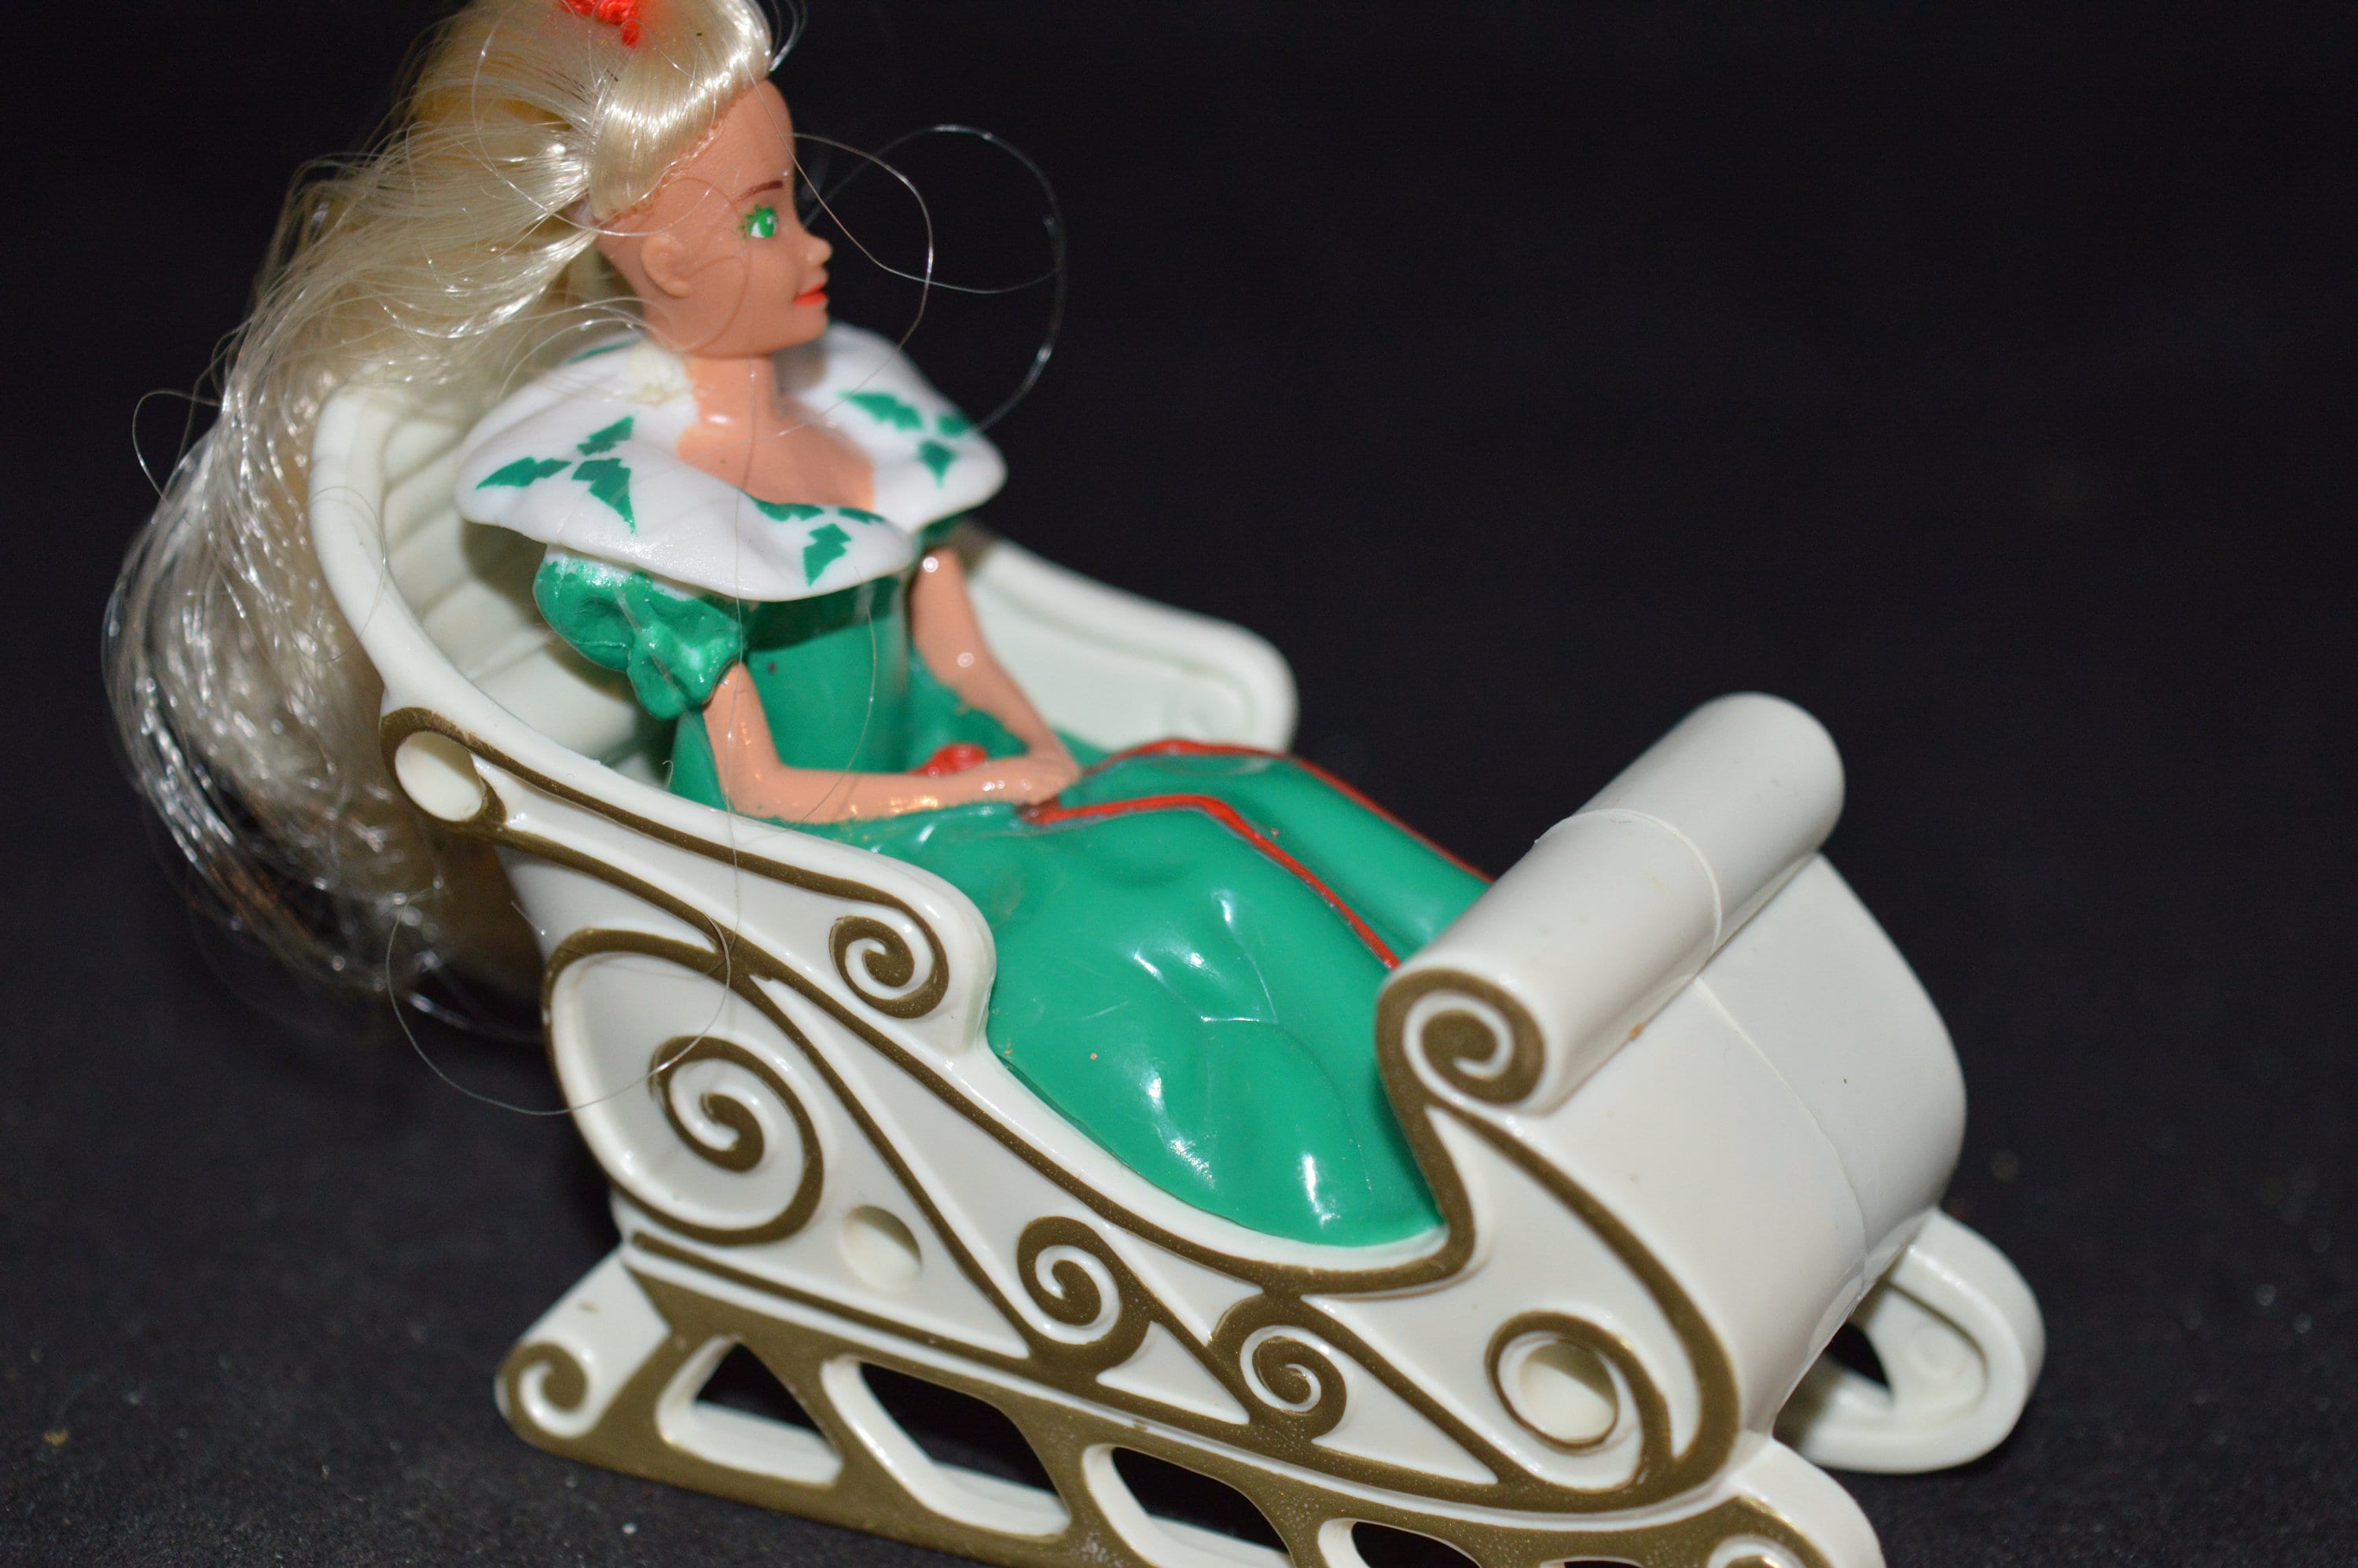 Details about   Mattel 1995 Holiday Barbie #1 In Sleigh McDonalds Happy Meal Toy Christmas